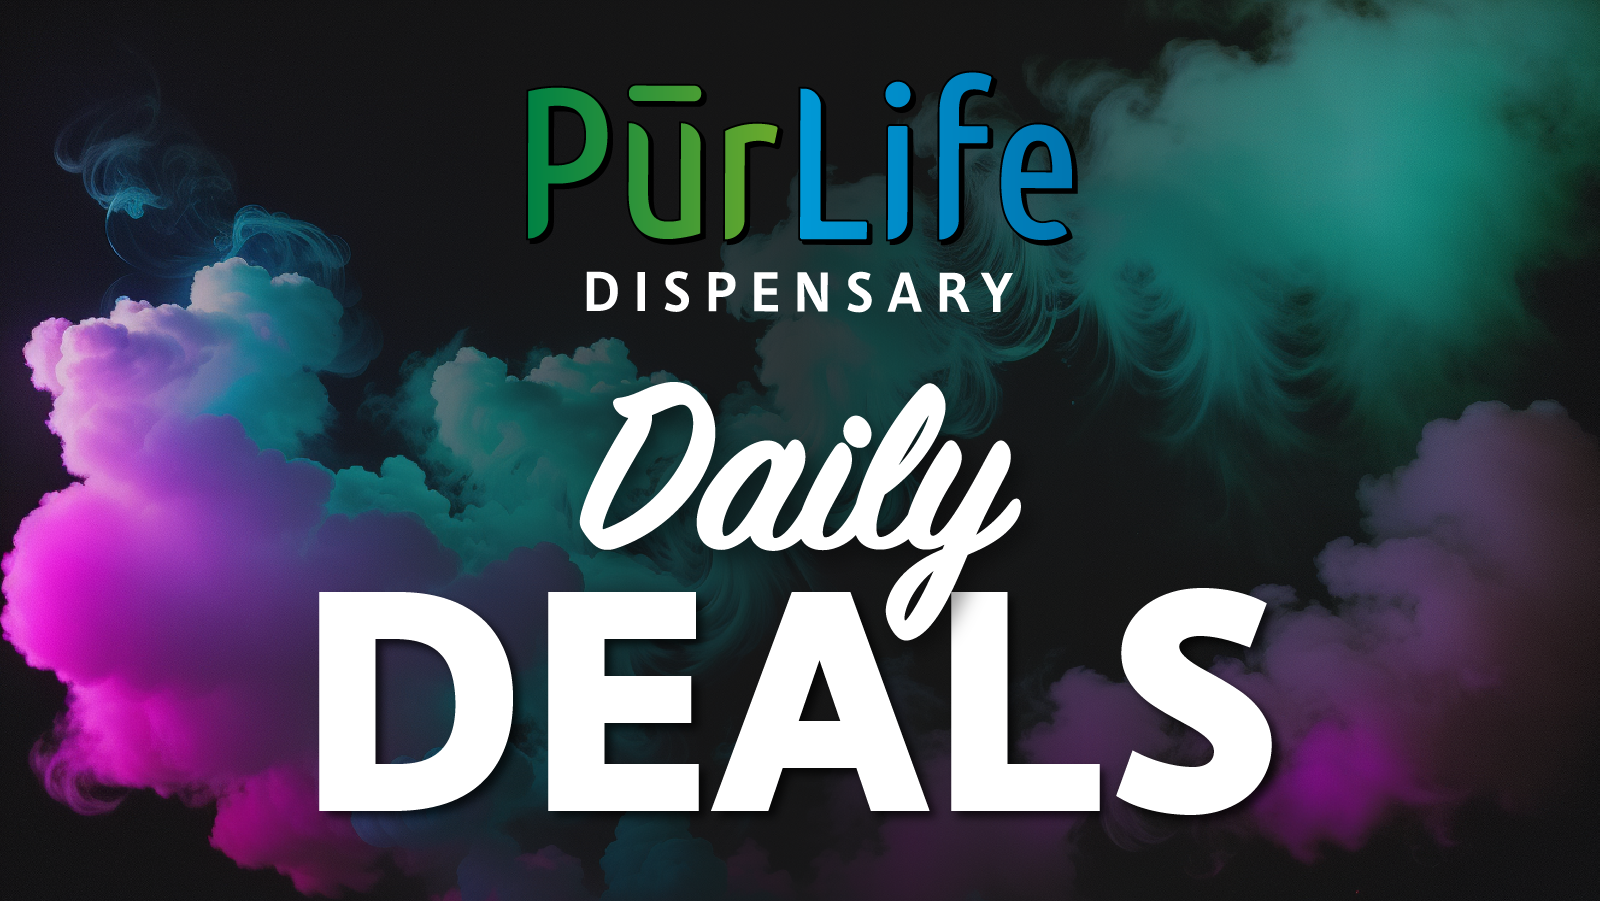 DAILY DEALS ARE HERE! - PurLife